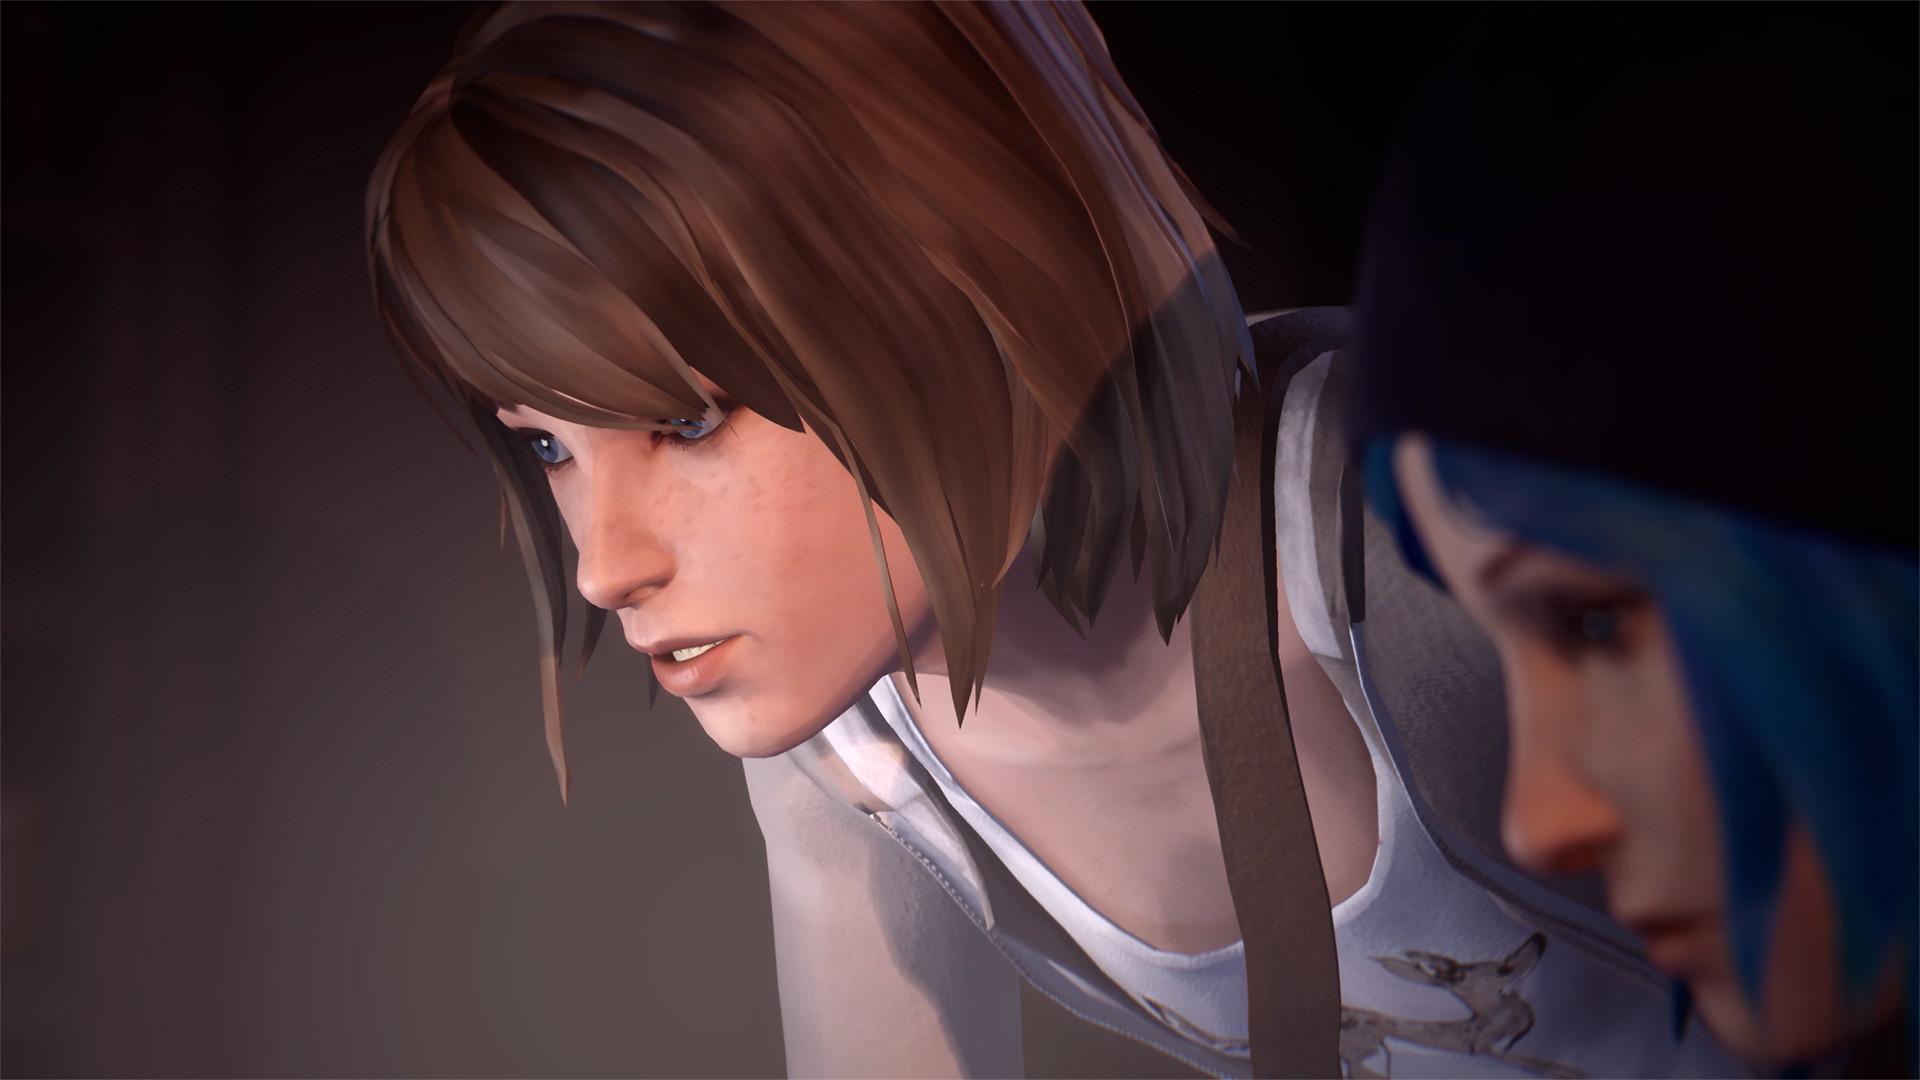 Screenshot №4 from game Life is Strange Remastered